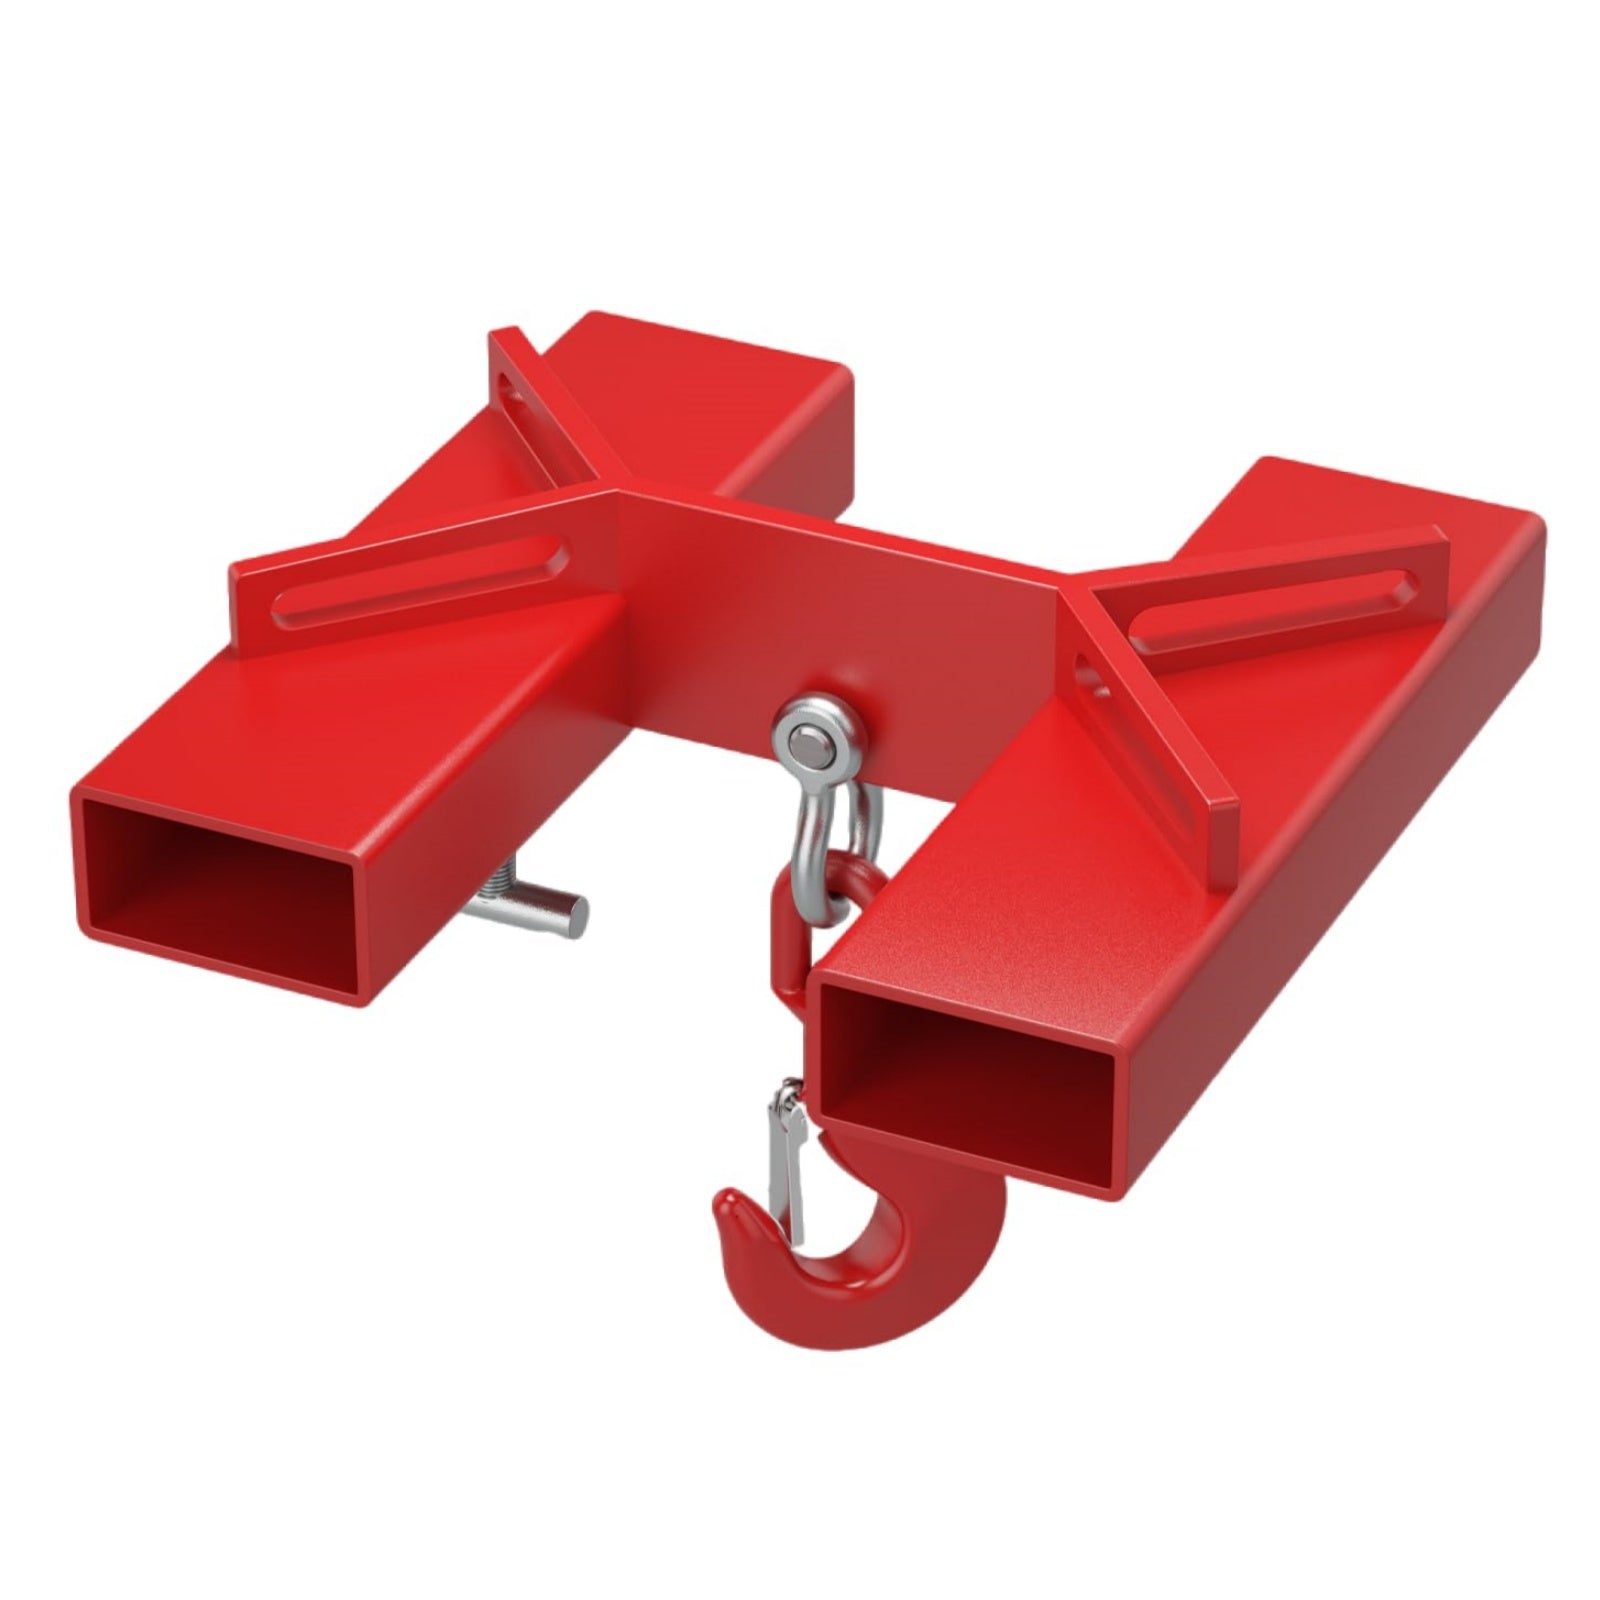 GARVEE Forklift Lifting Hook Attachment, 6600 lbs Capacity, with Swivel Hook and 2 T-Bolts, Ideal for Converting Your Forklift into a Mobile Crane, Red